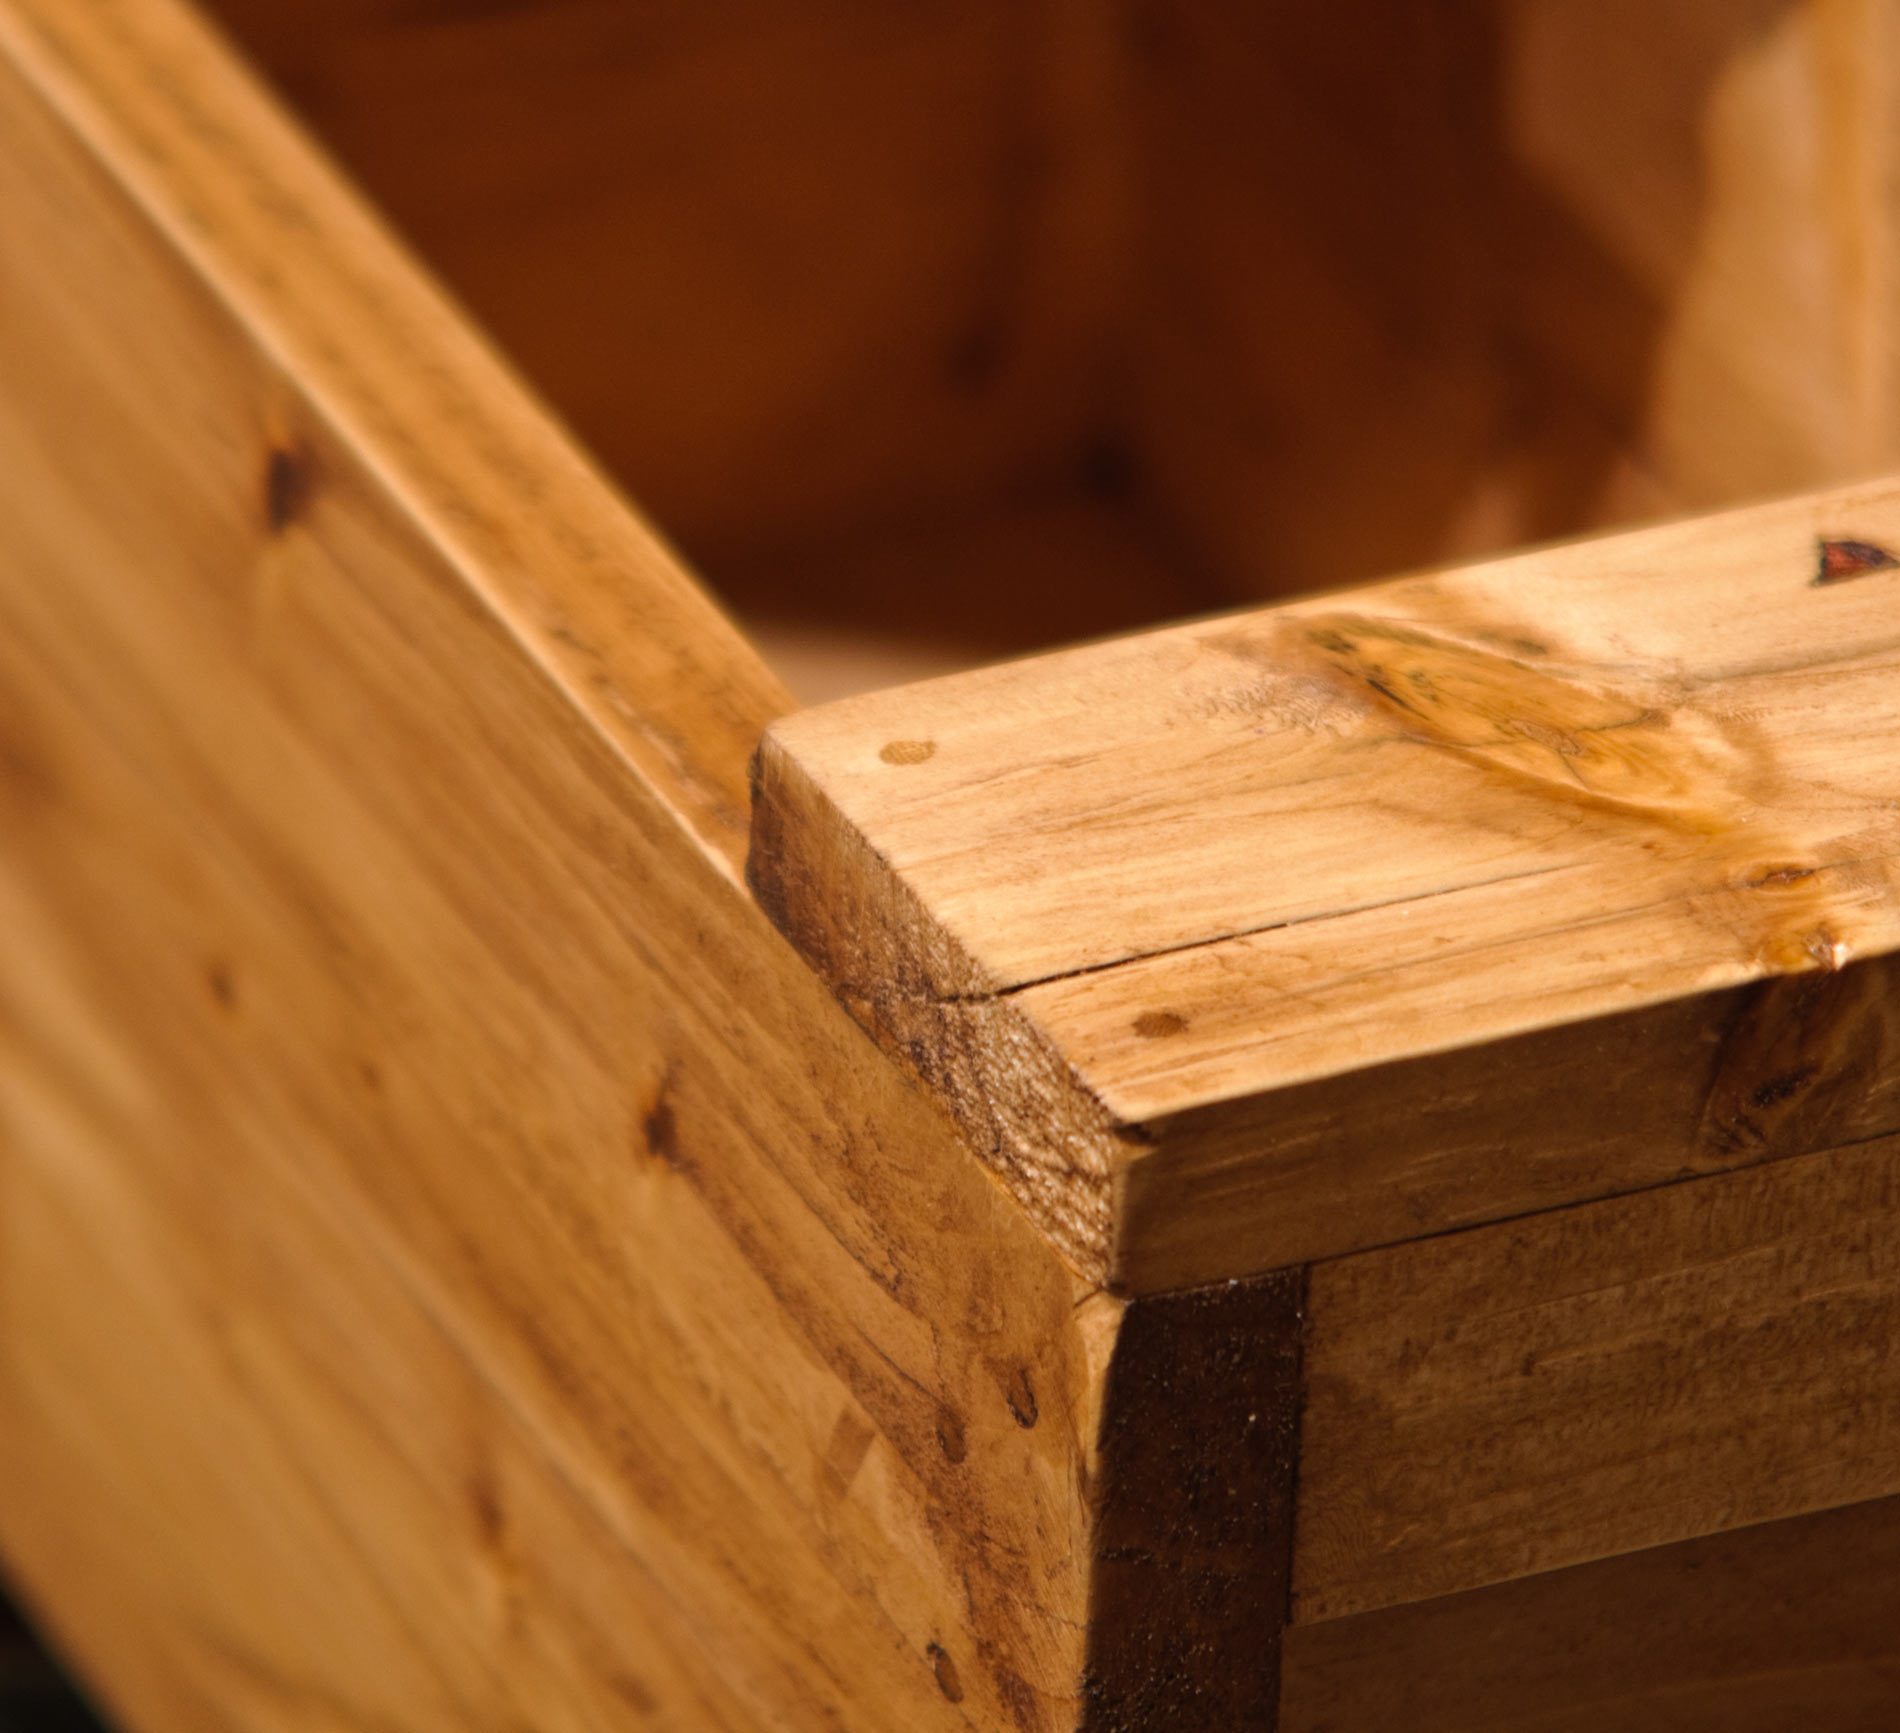 hand crafted rustic toolboxes